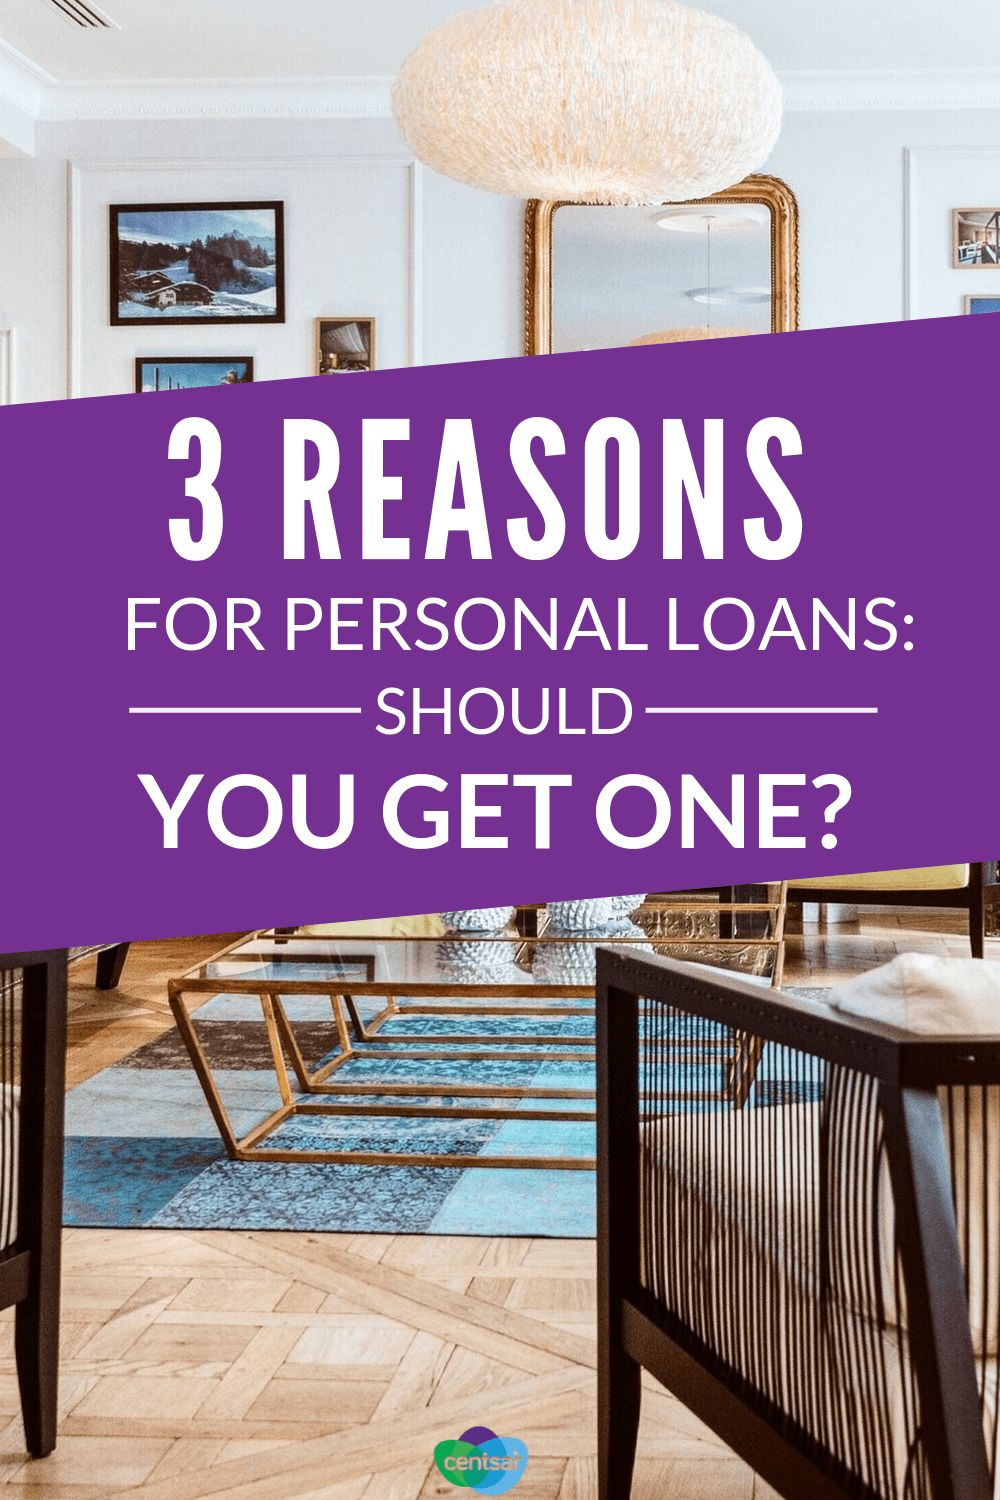 3 Reasons for Personal Loans: Should You Get One? Not sure whether taking on debt is a good idea? Check out the top reasons for personal loans and see these tips whether one might be right for you. #finance #personalloan #loan